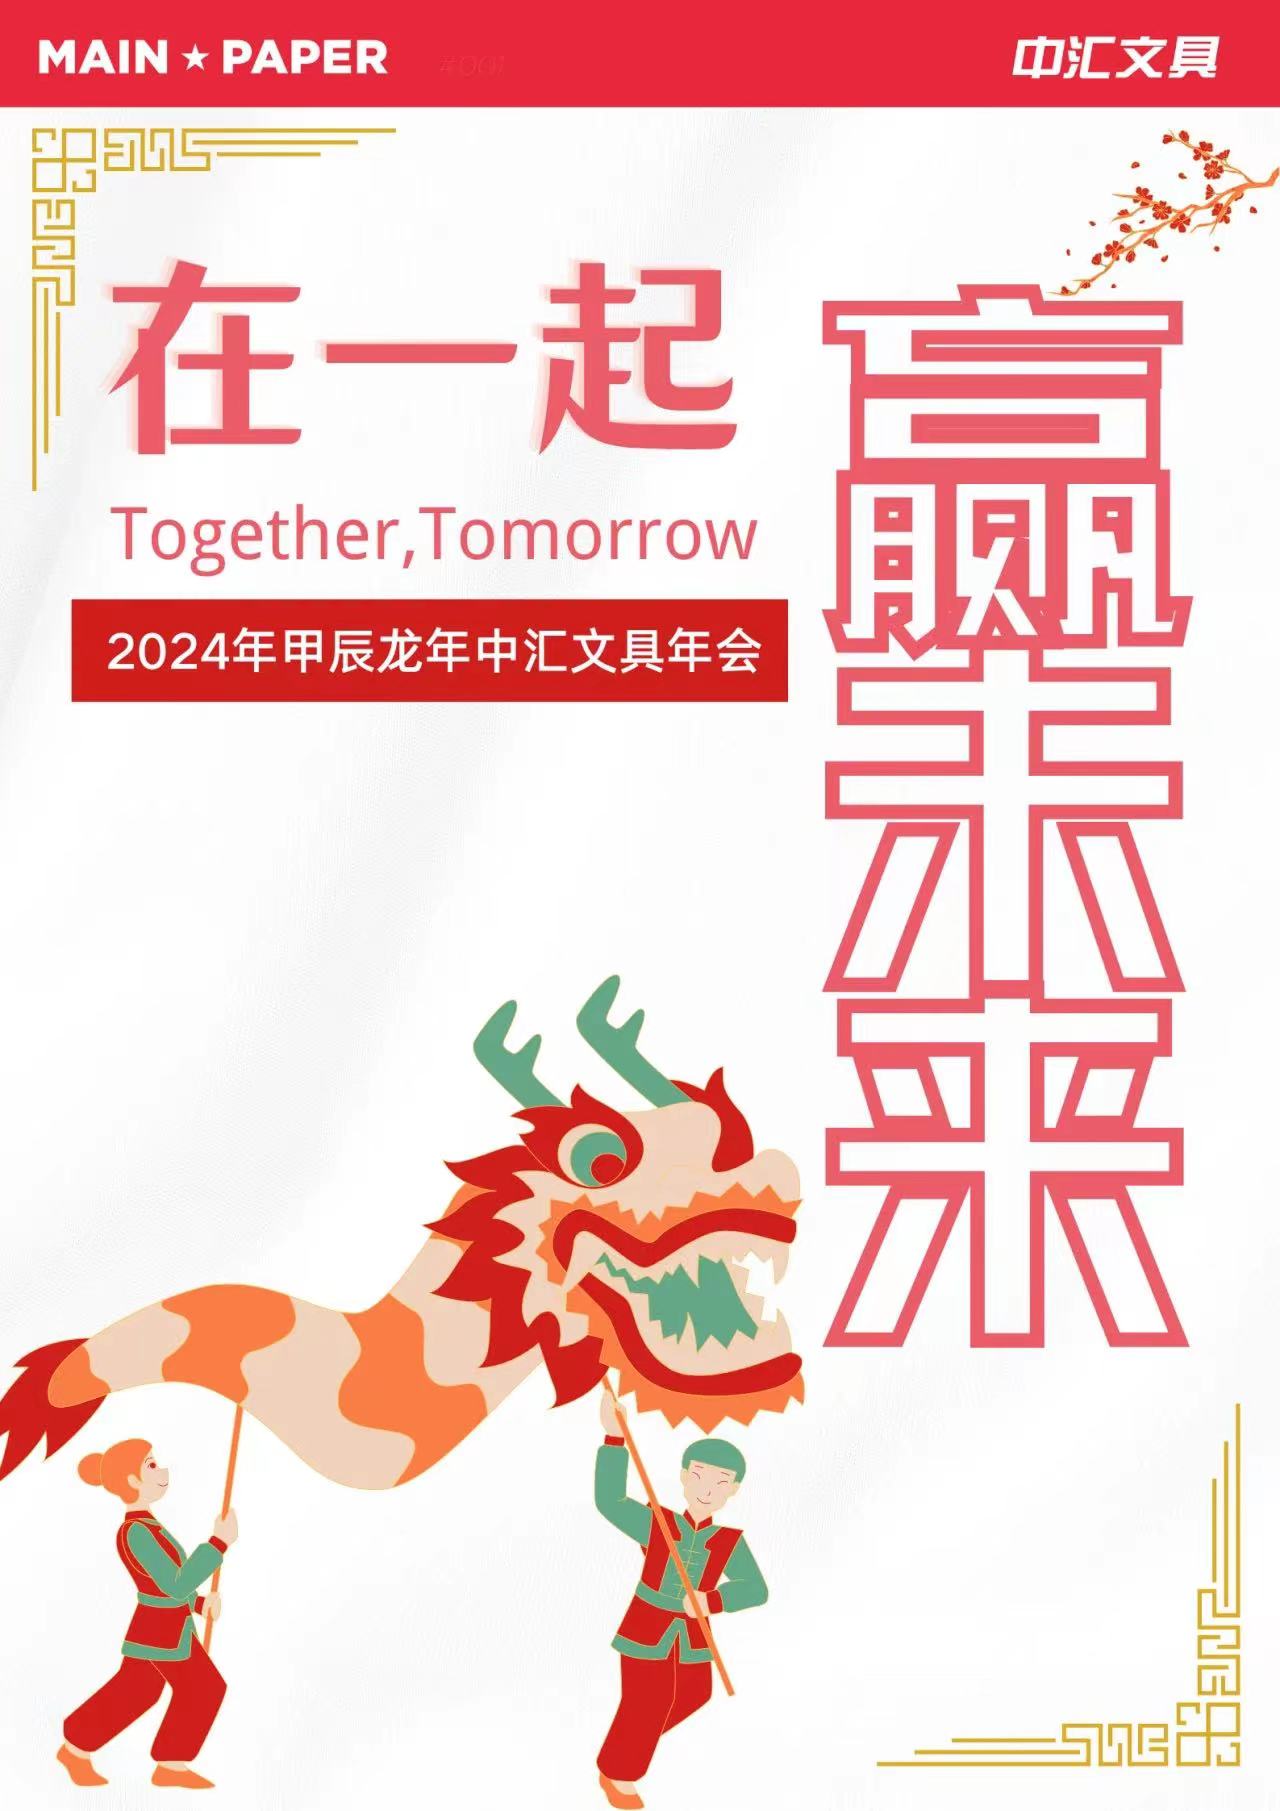 "Together, Tomorrow" Main Paper Dragon Annual Conference 2024